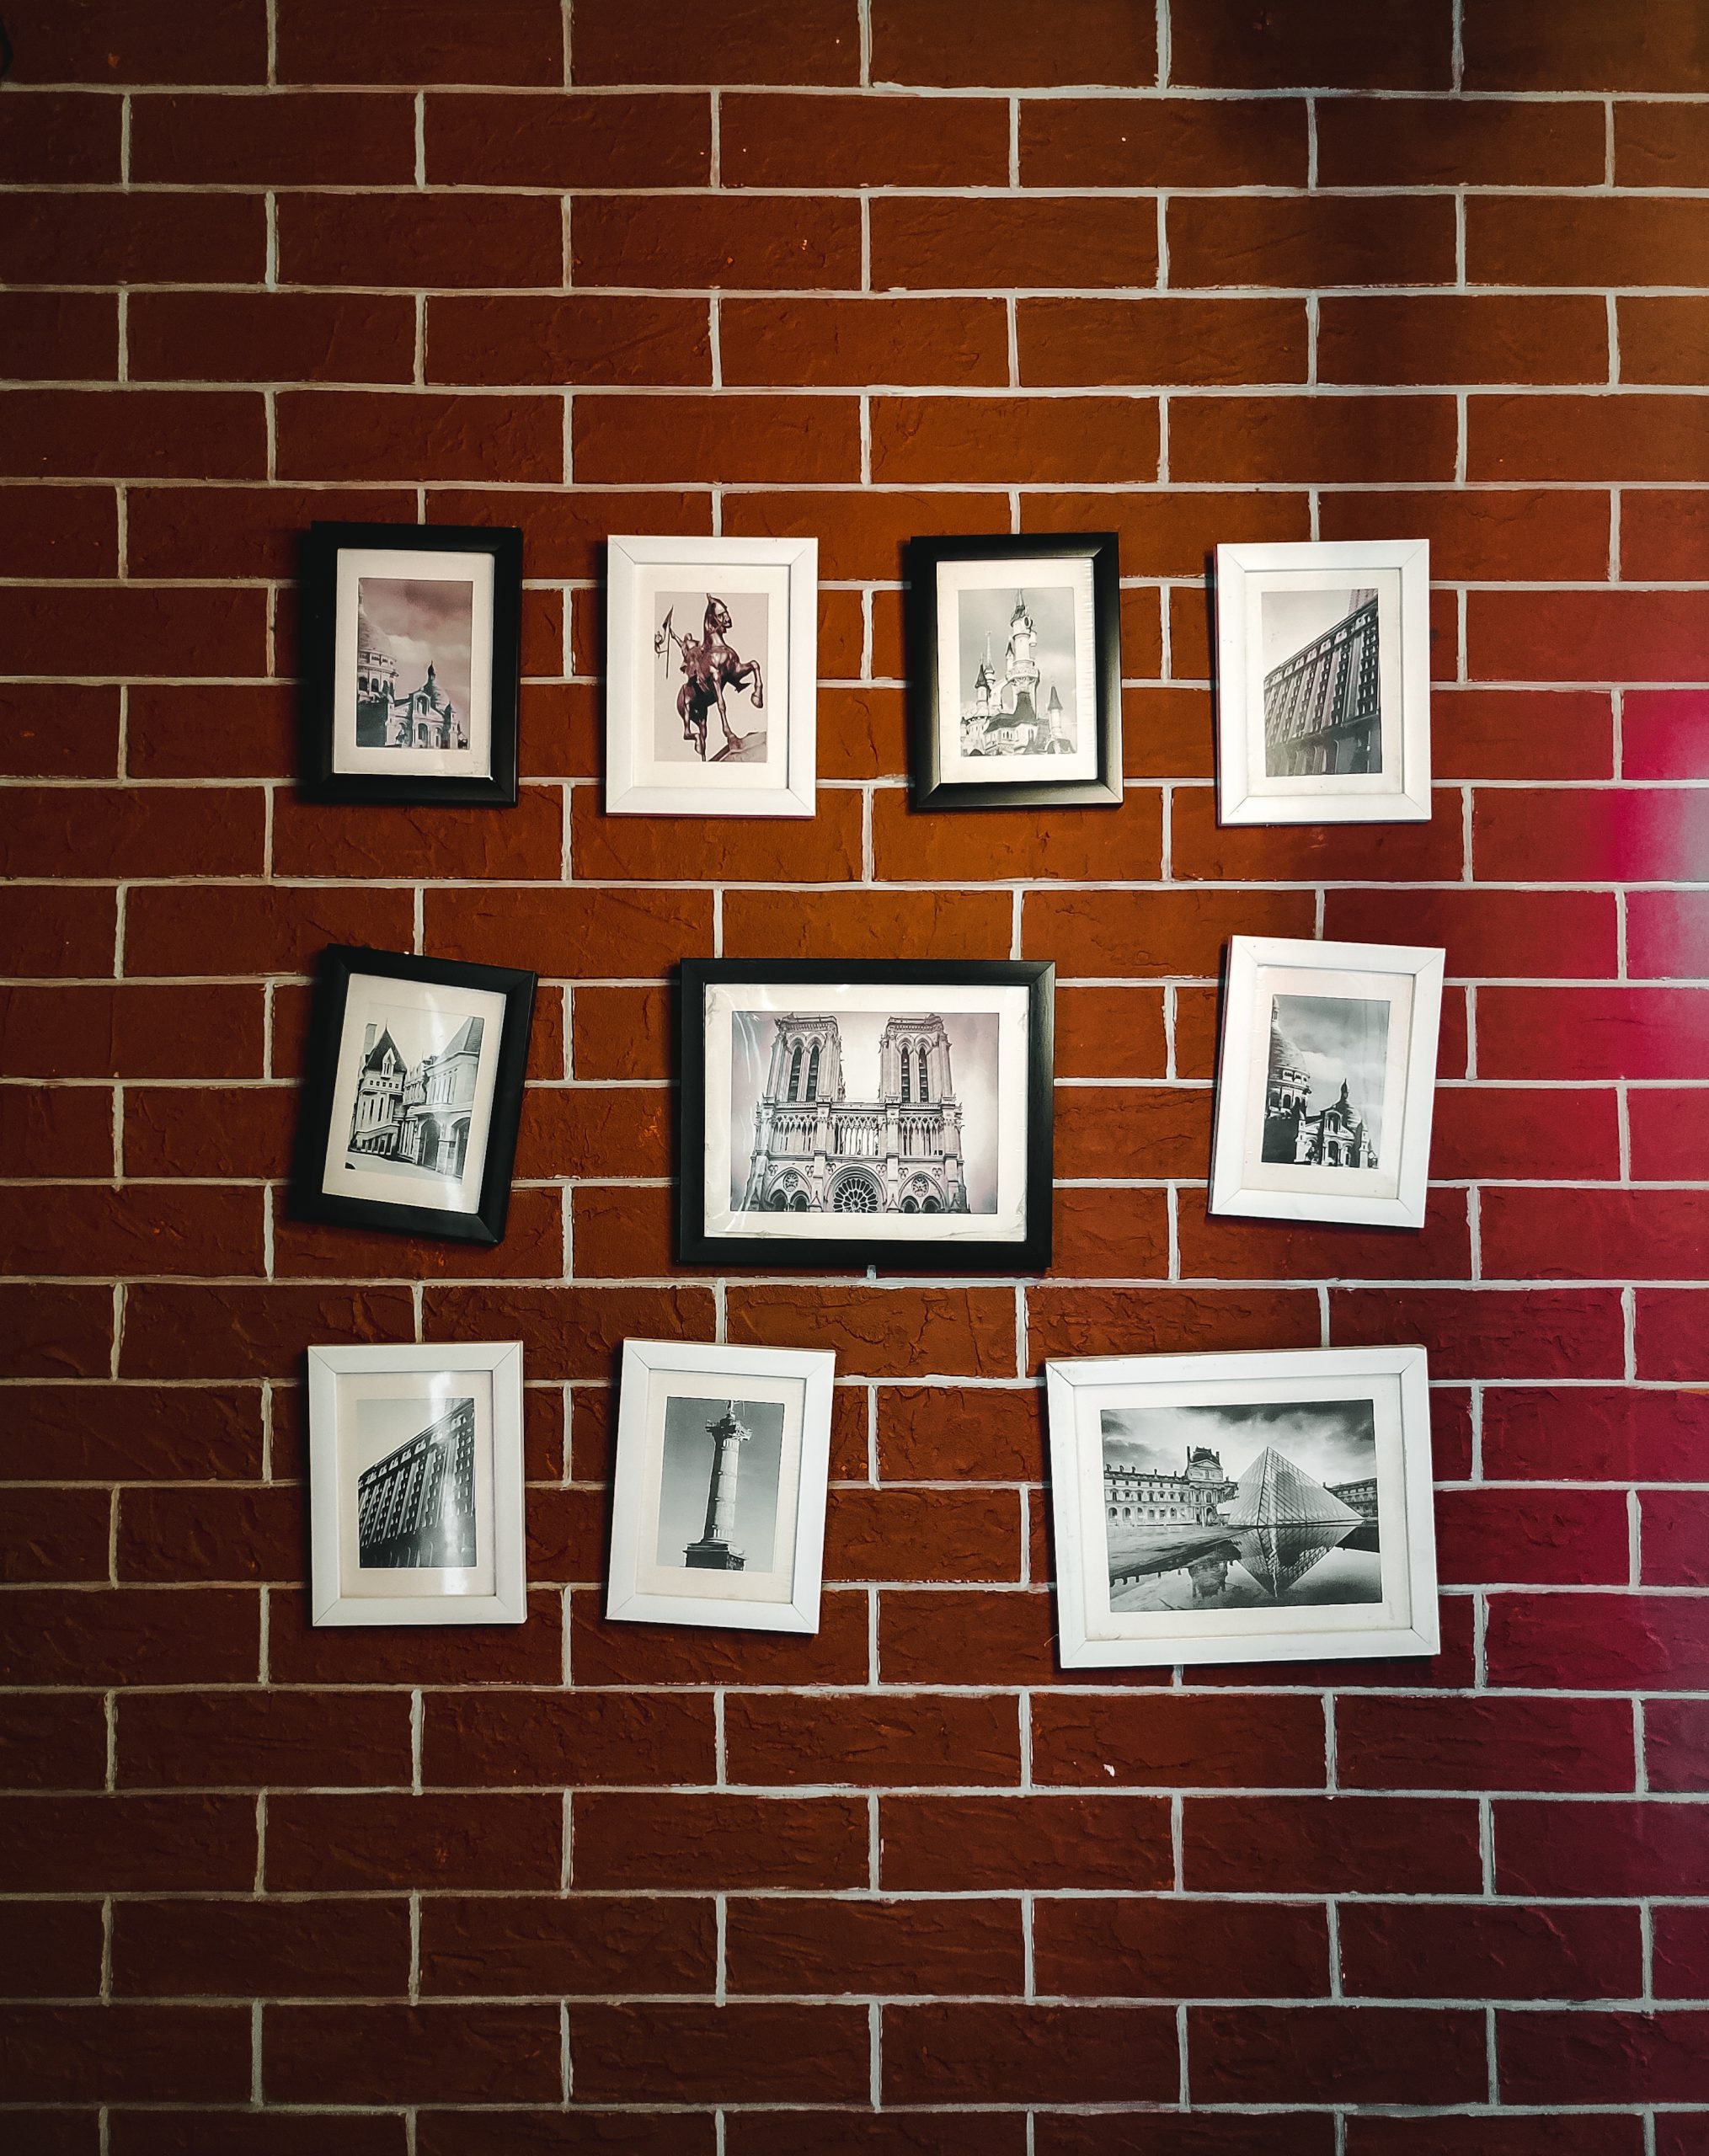 Photo frames hanging on a wall - Free Image by G S K on PixaHive.com